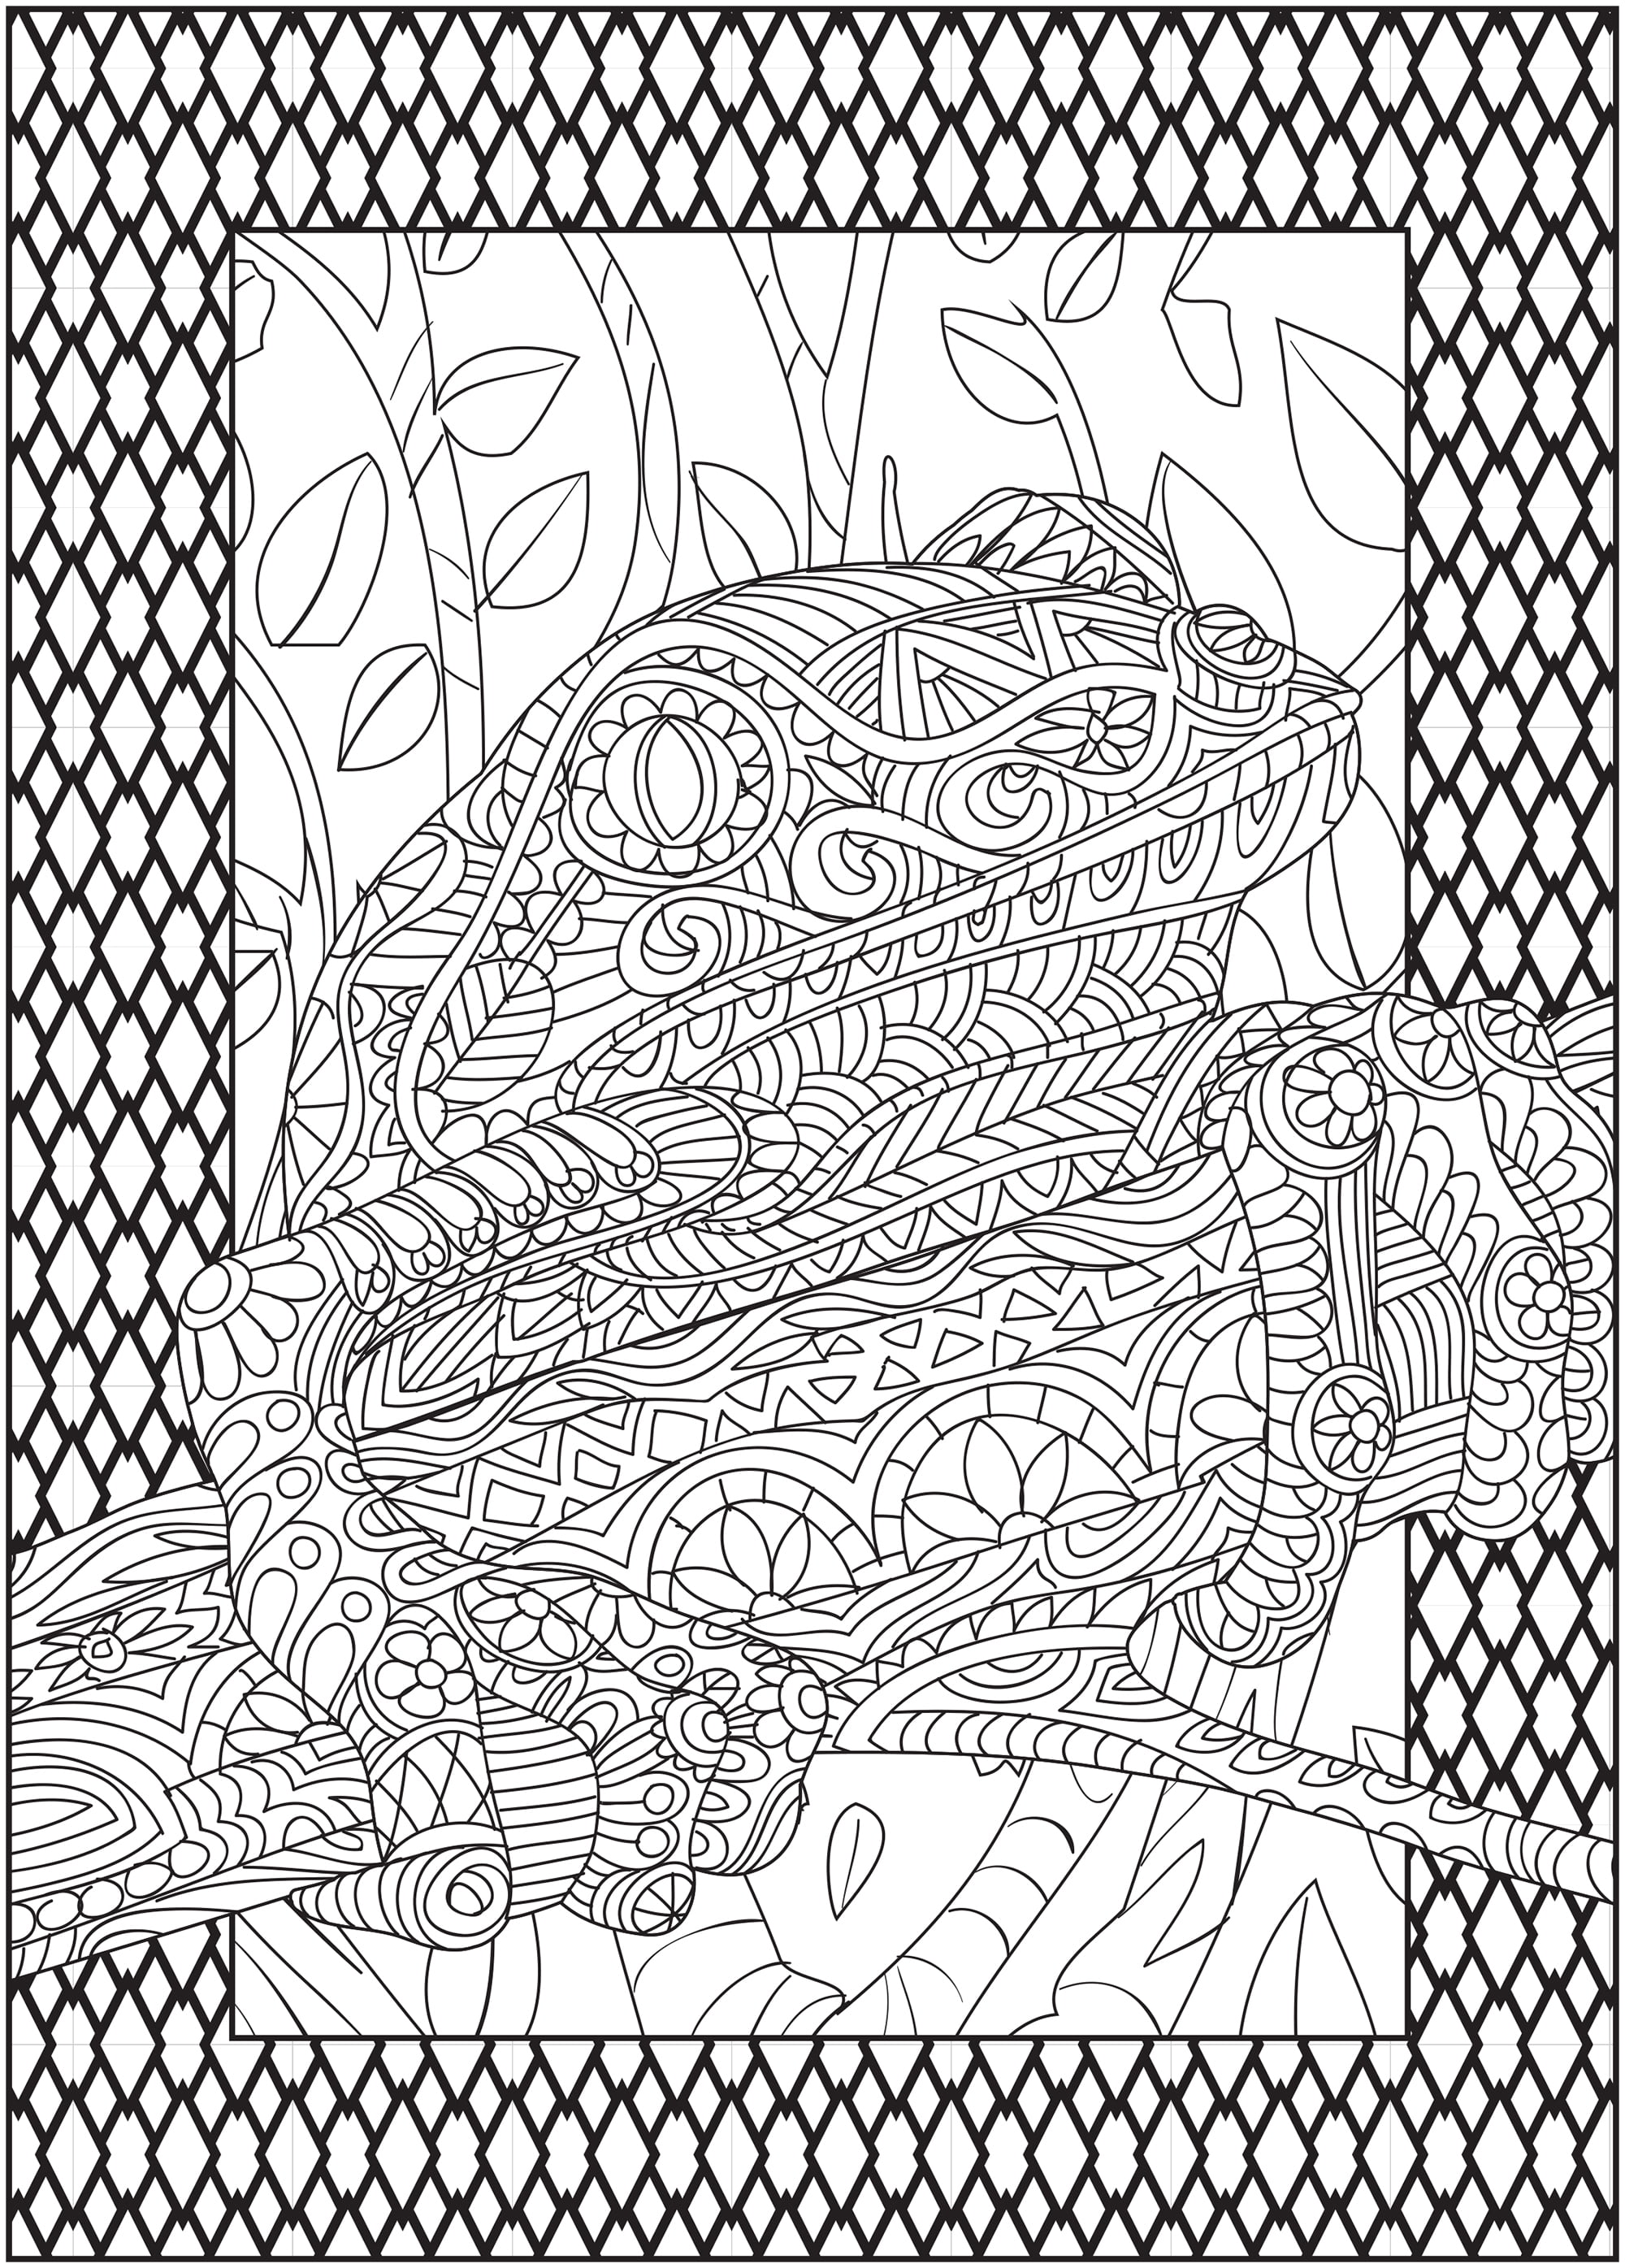 Timeless Creations: Creatures of Beauty by Donna  Coloring books, Colorful  art, Coloring book pages